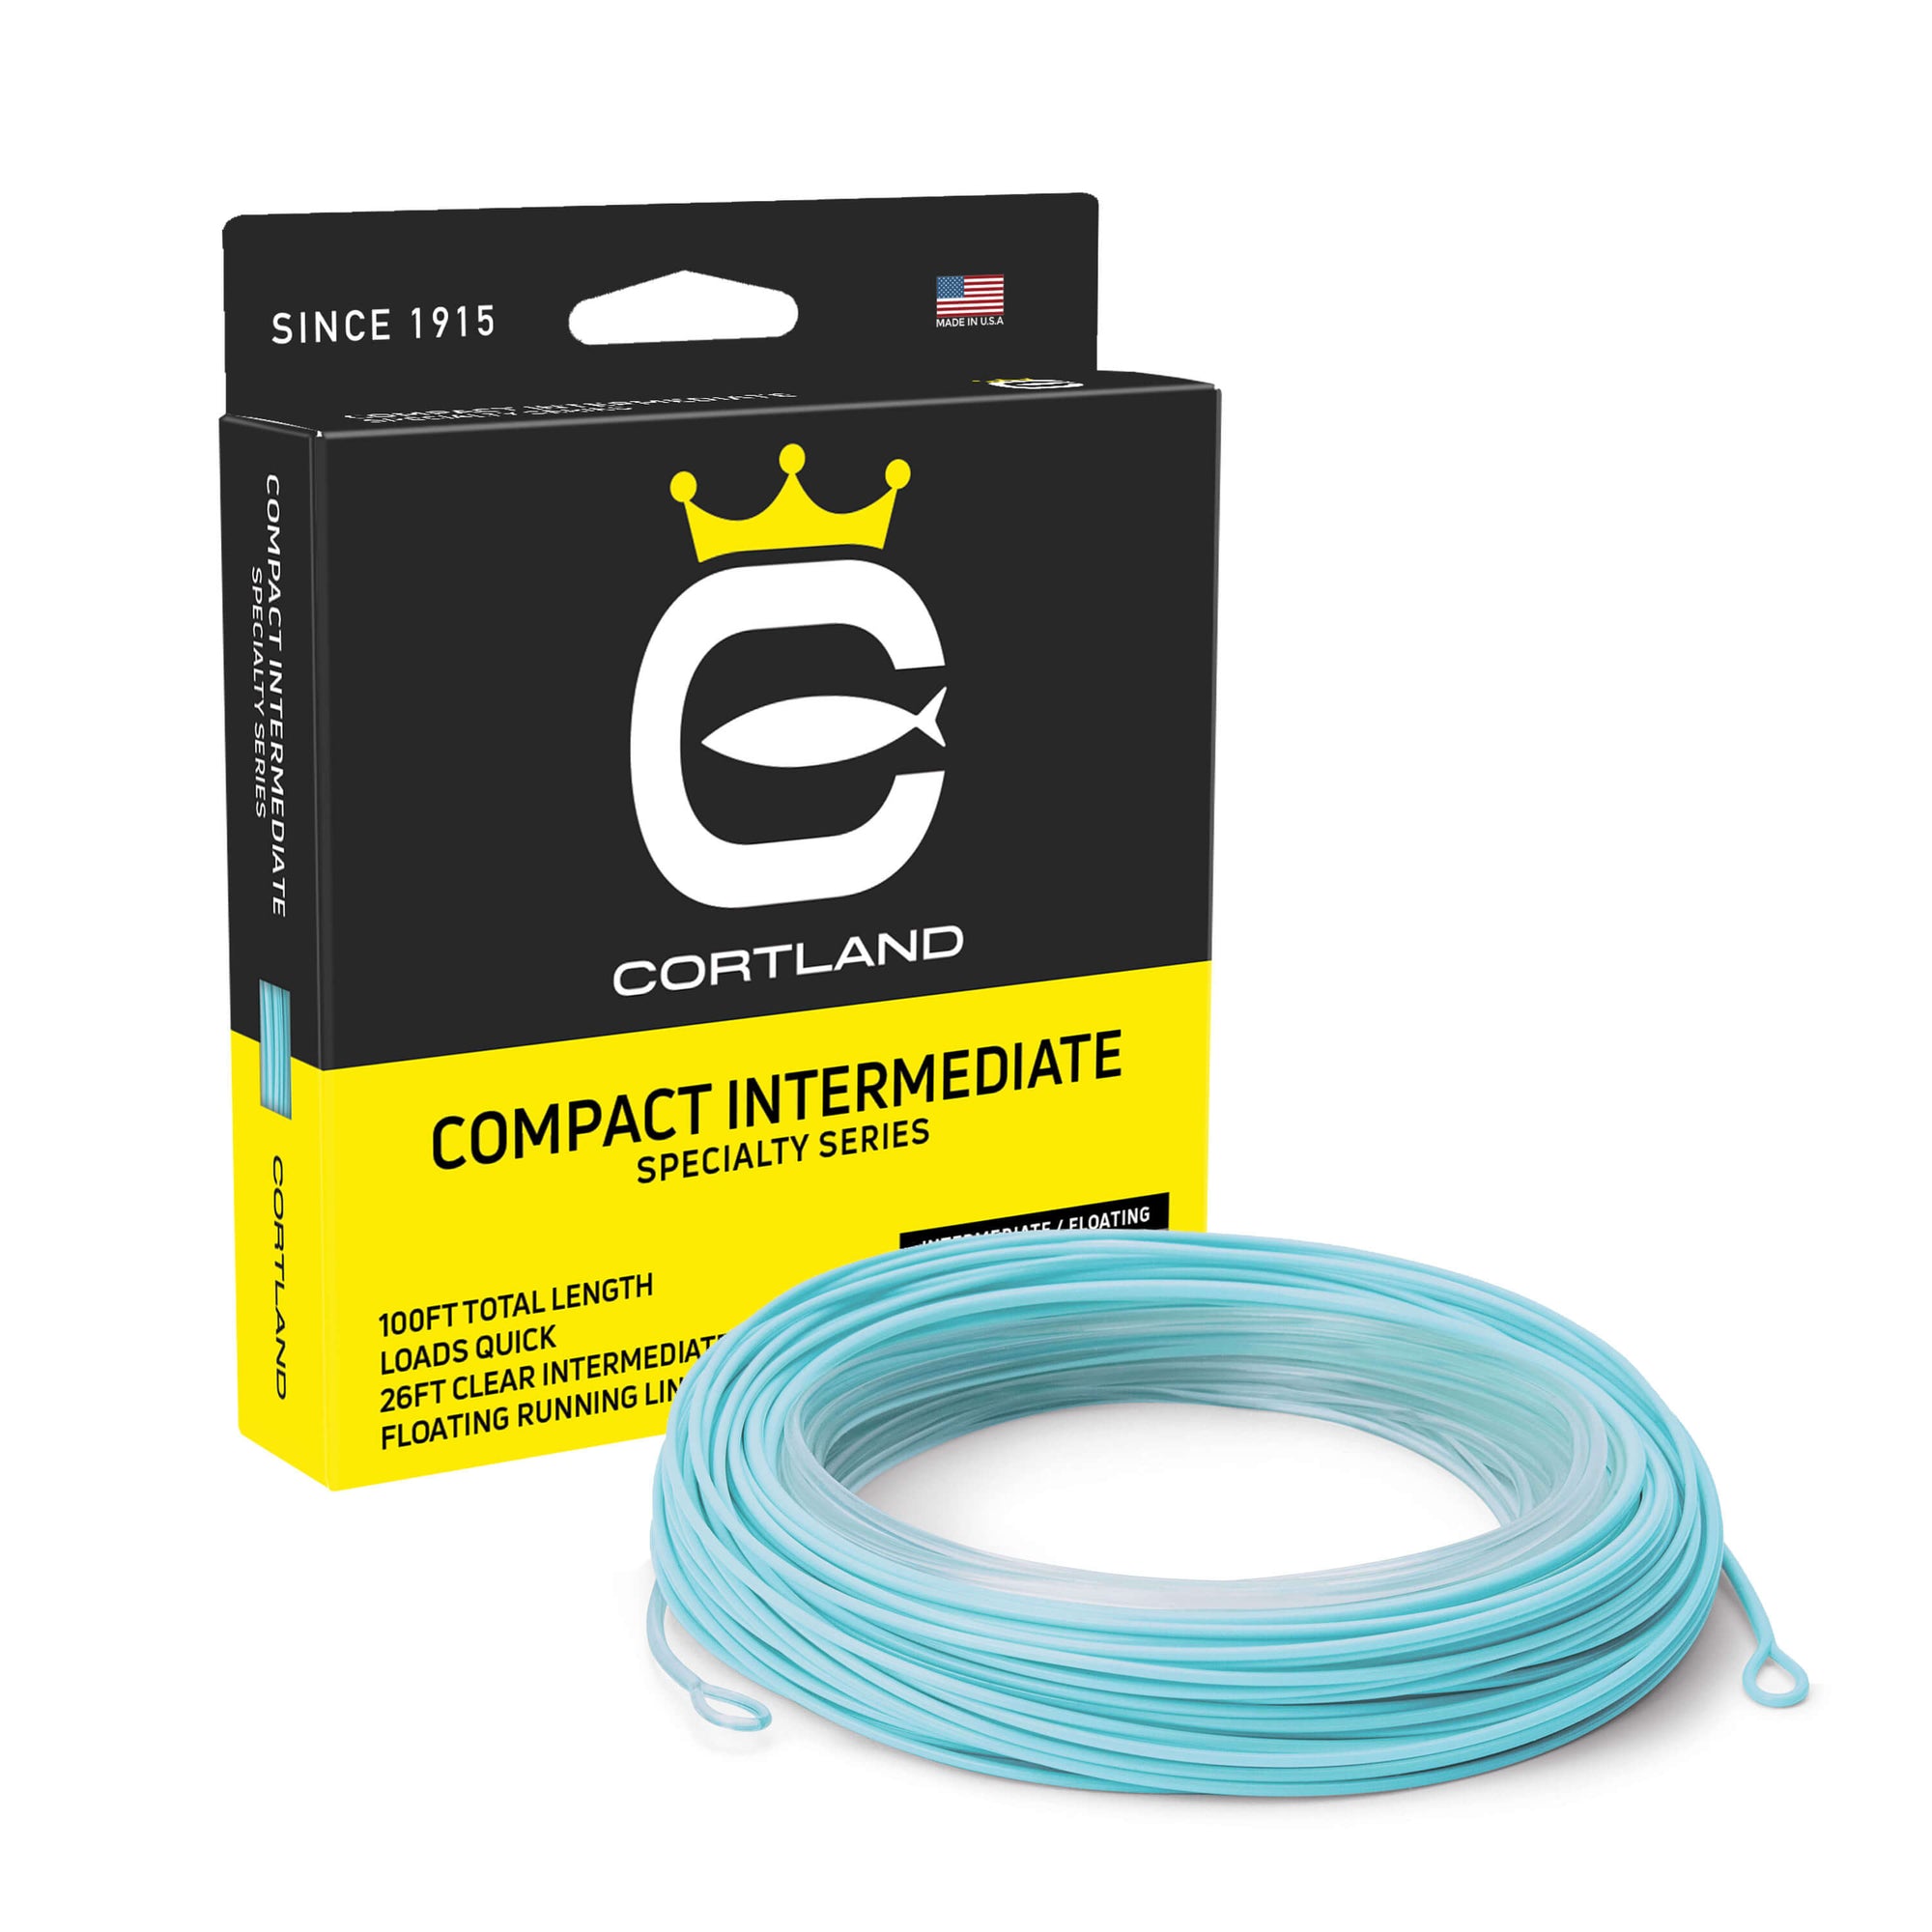 Compact Intermediate Fly Fishing Line and Box. The coil is clear and light blue. The box is black at the top and yellow at the bottom. 